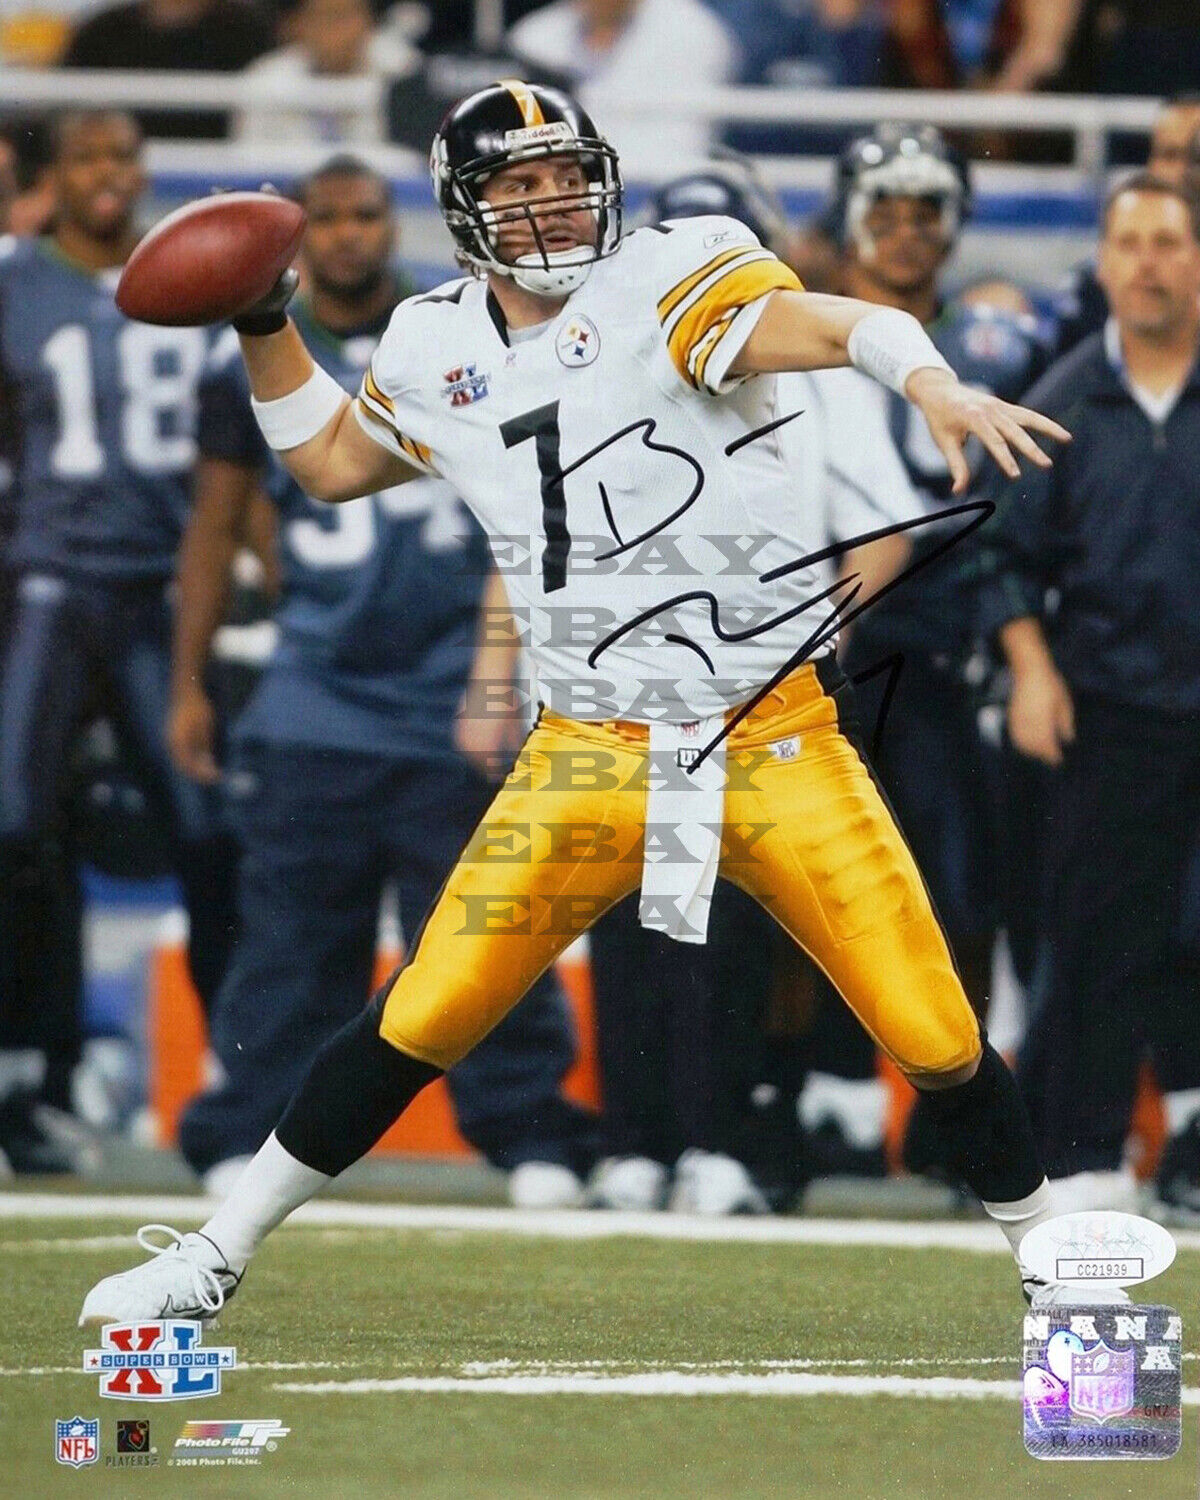 BEN ROETHLISBERGER PITTSBURGH STEELERS Signed 8x10 autographed Photo Poster painting Reprint